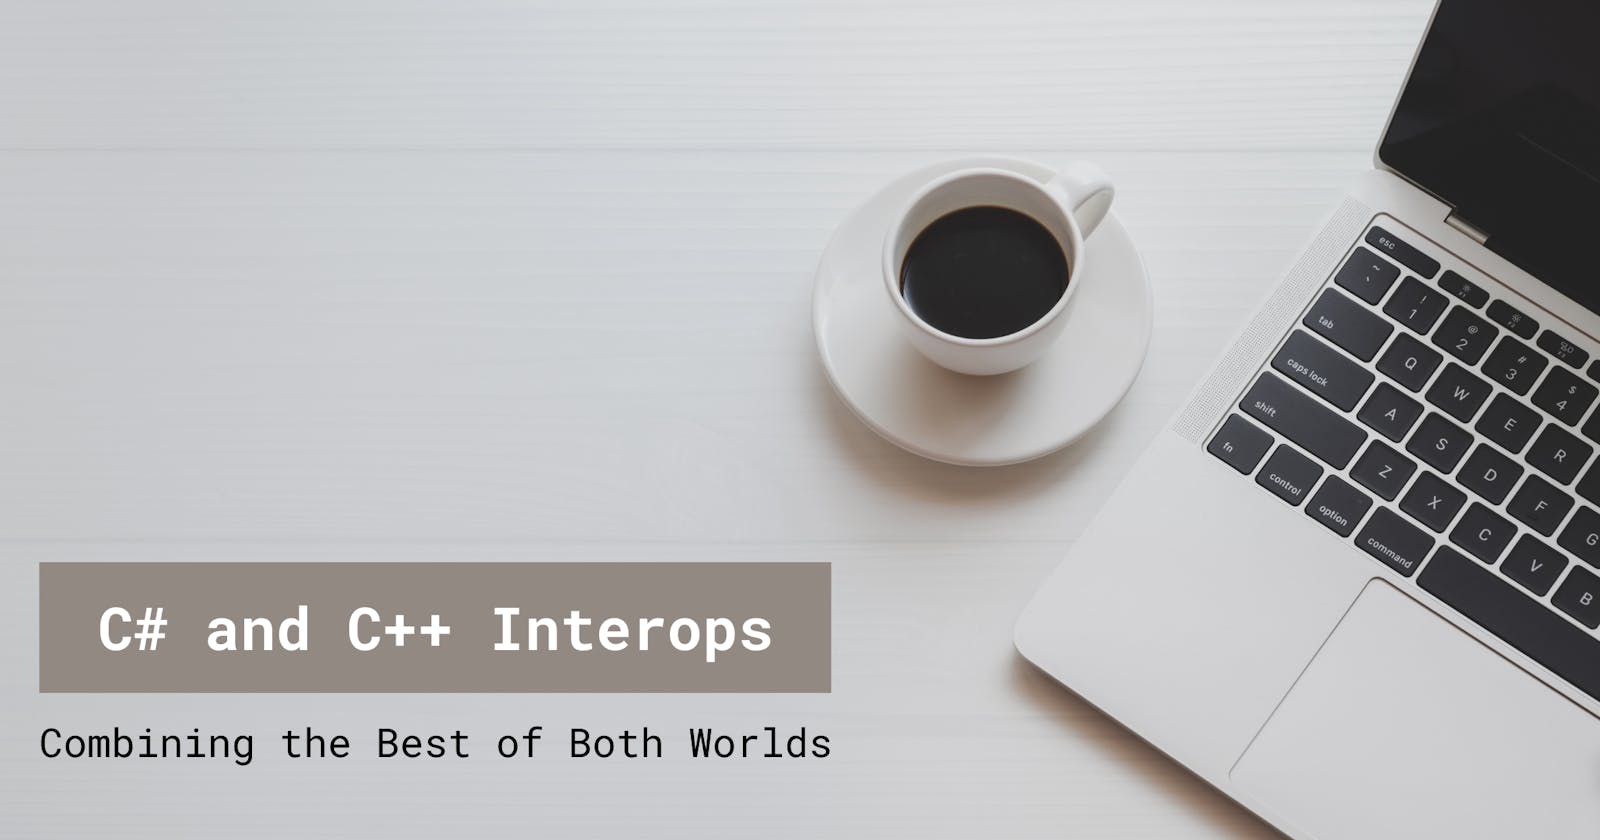 C# and C++ Interops: Combining the Best of Both Worlds